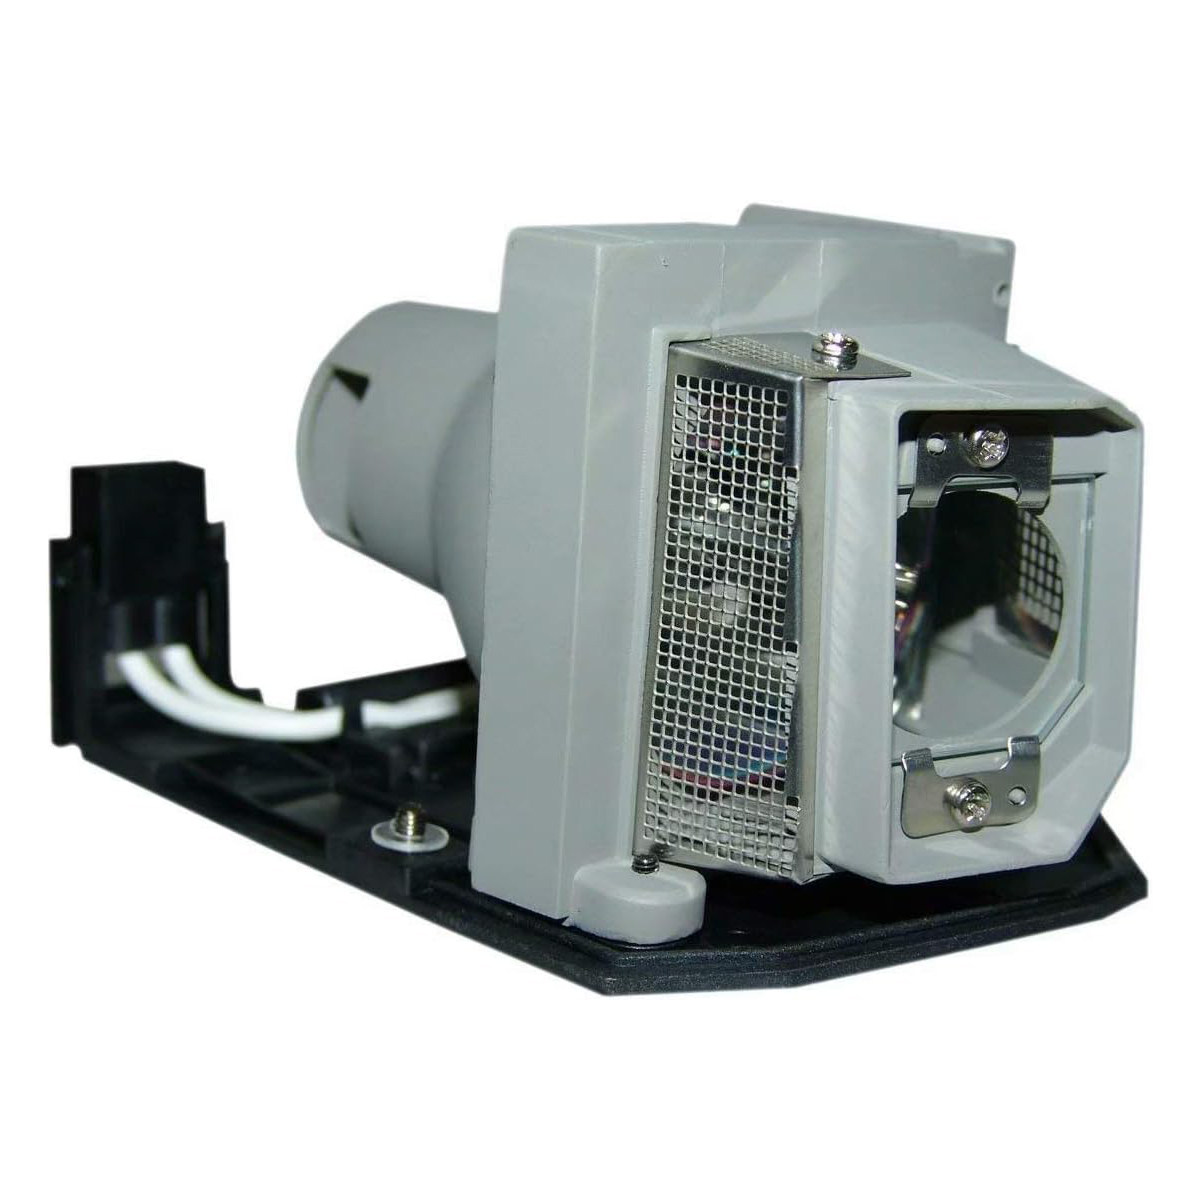 Replacement Projector lamp POA-LMP138 For Sanyo PDG-DWL 100 PDG-DXL 100